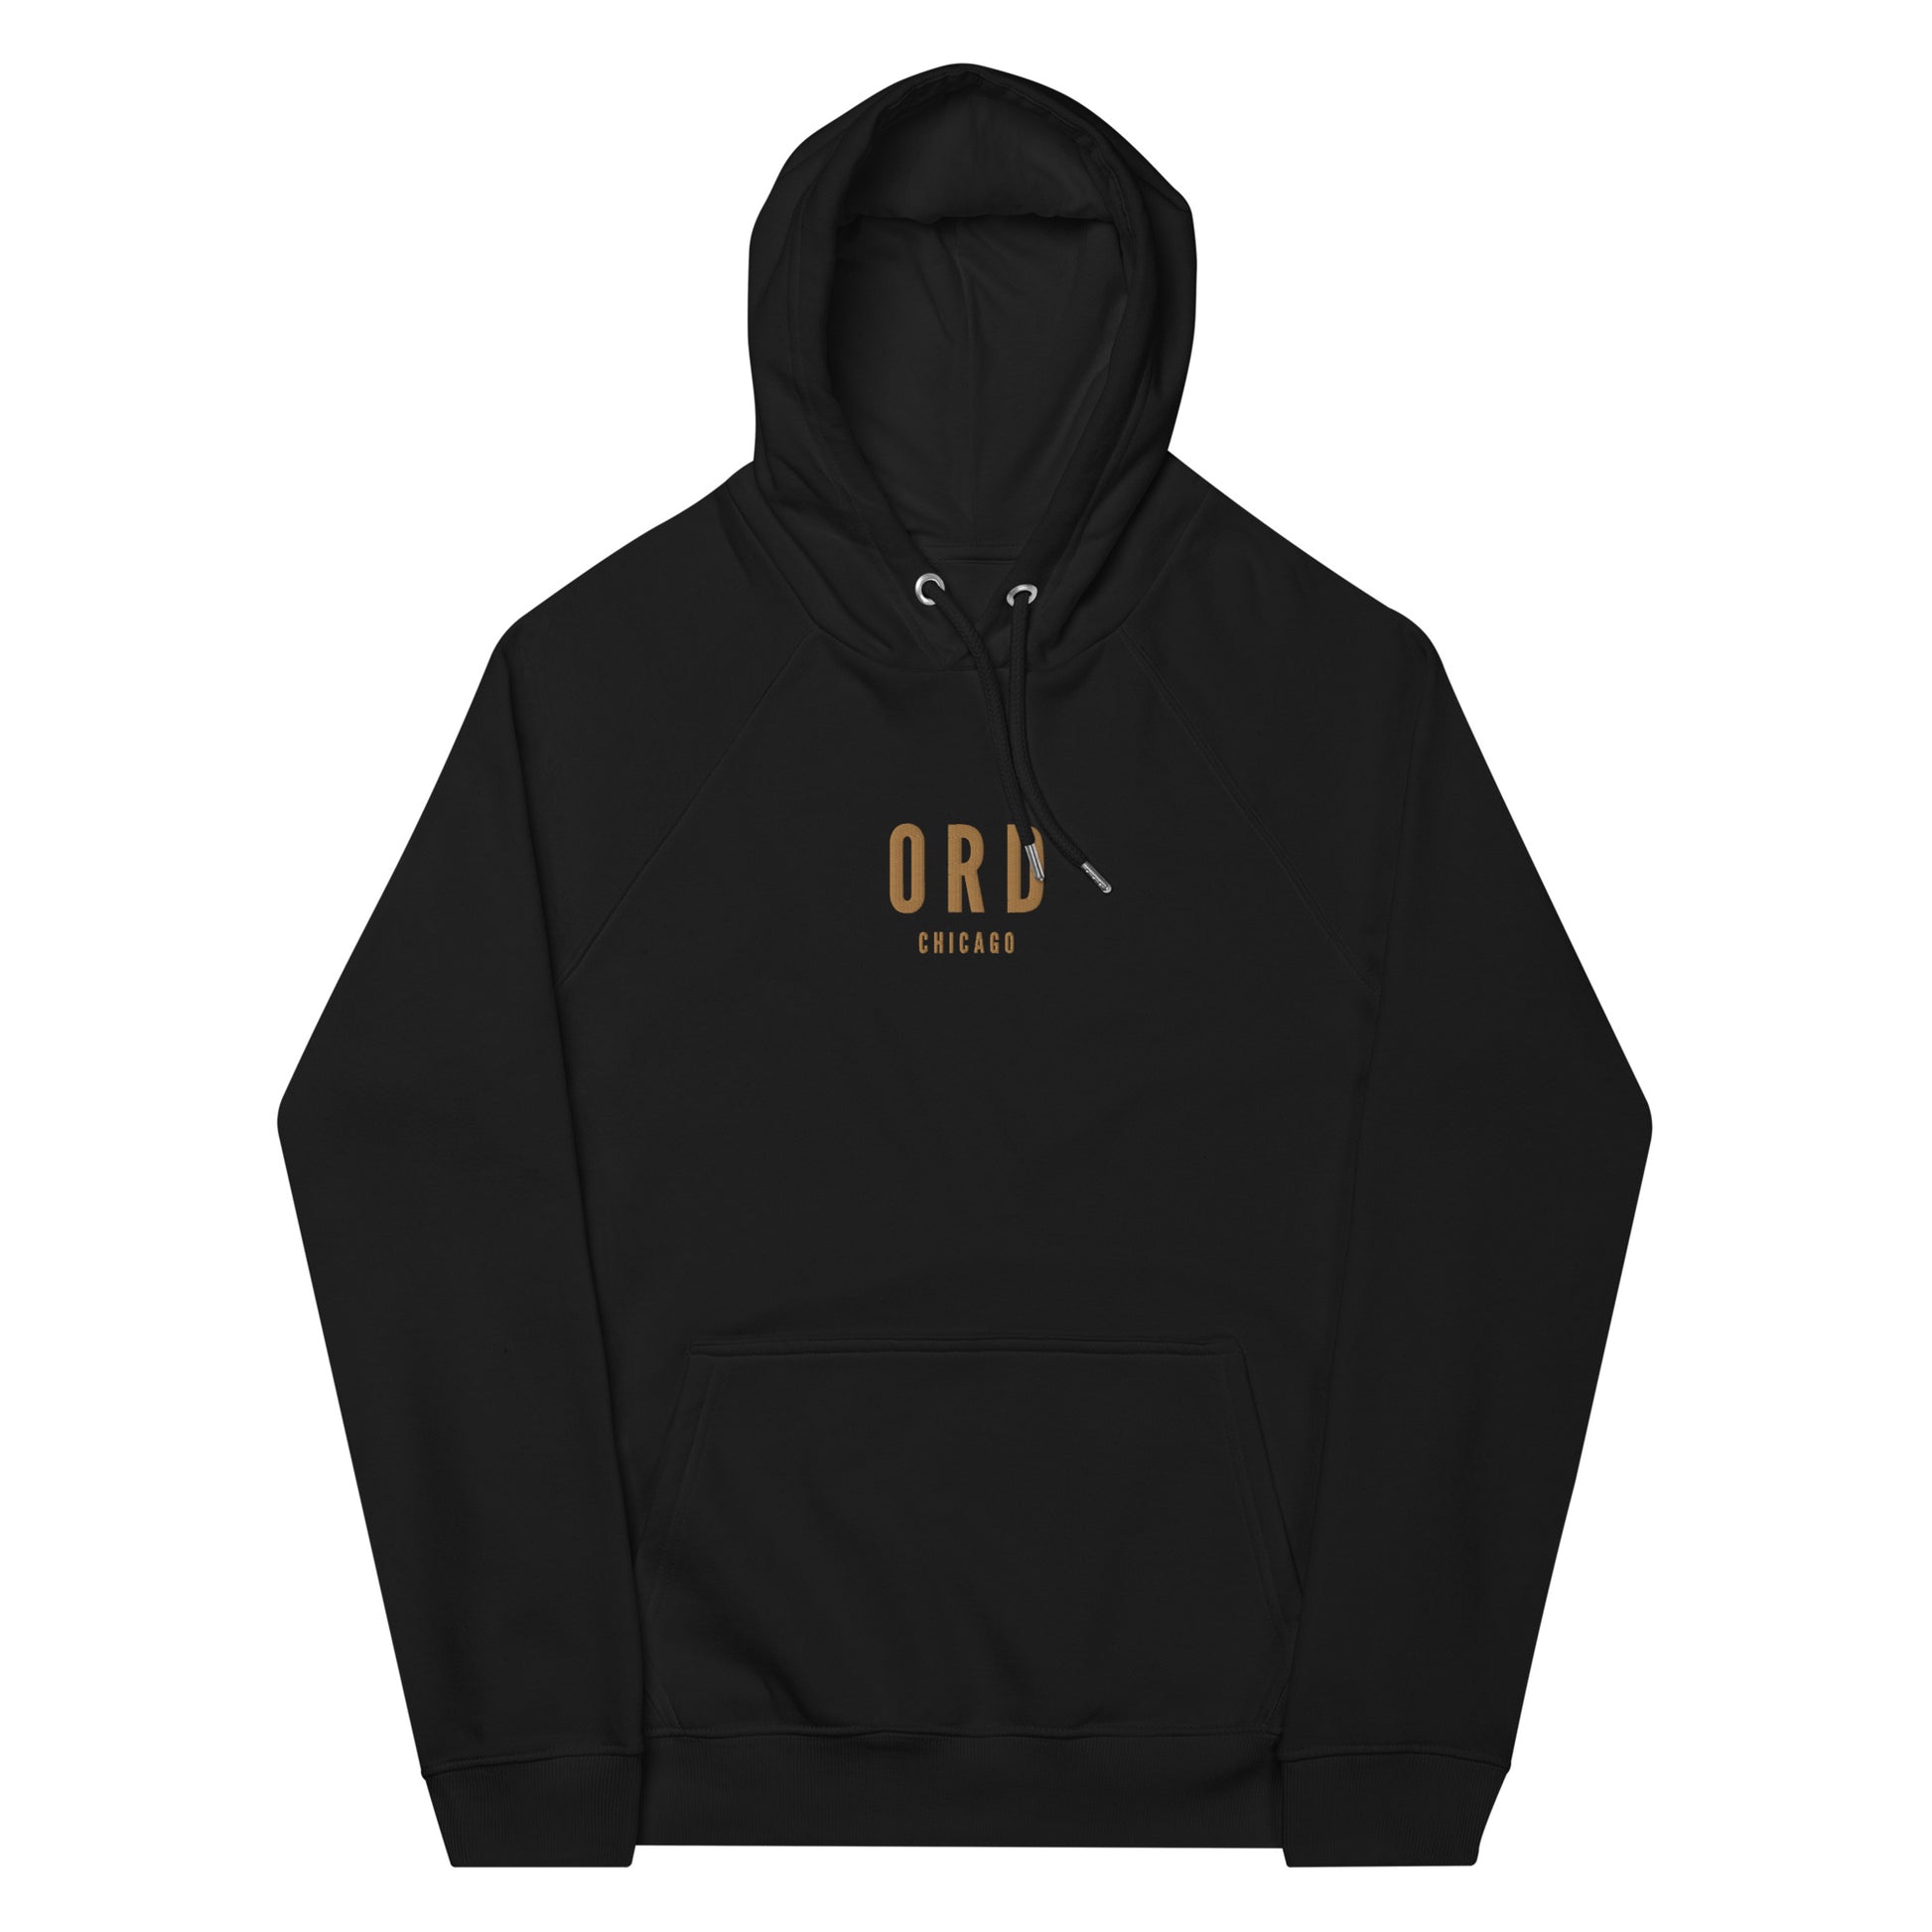 City Organic Hoodie - Old Gold • ORD Chicago • YHM Designs - Image 10